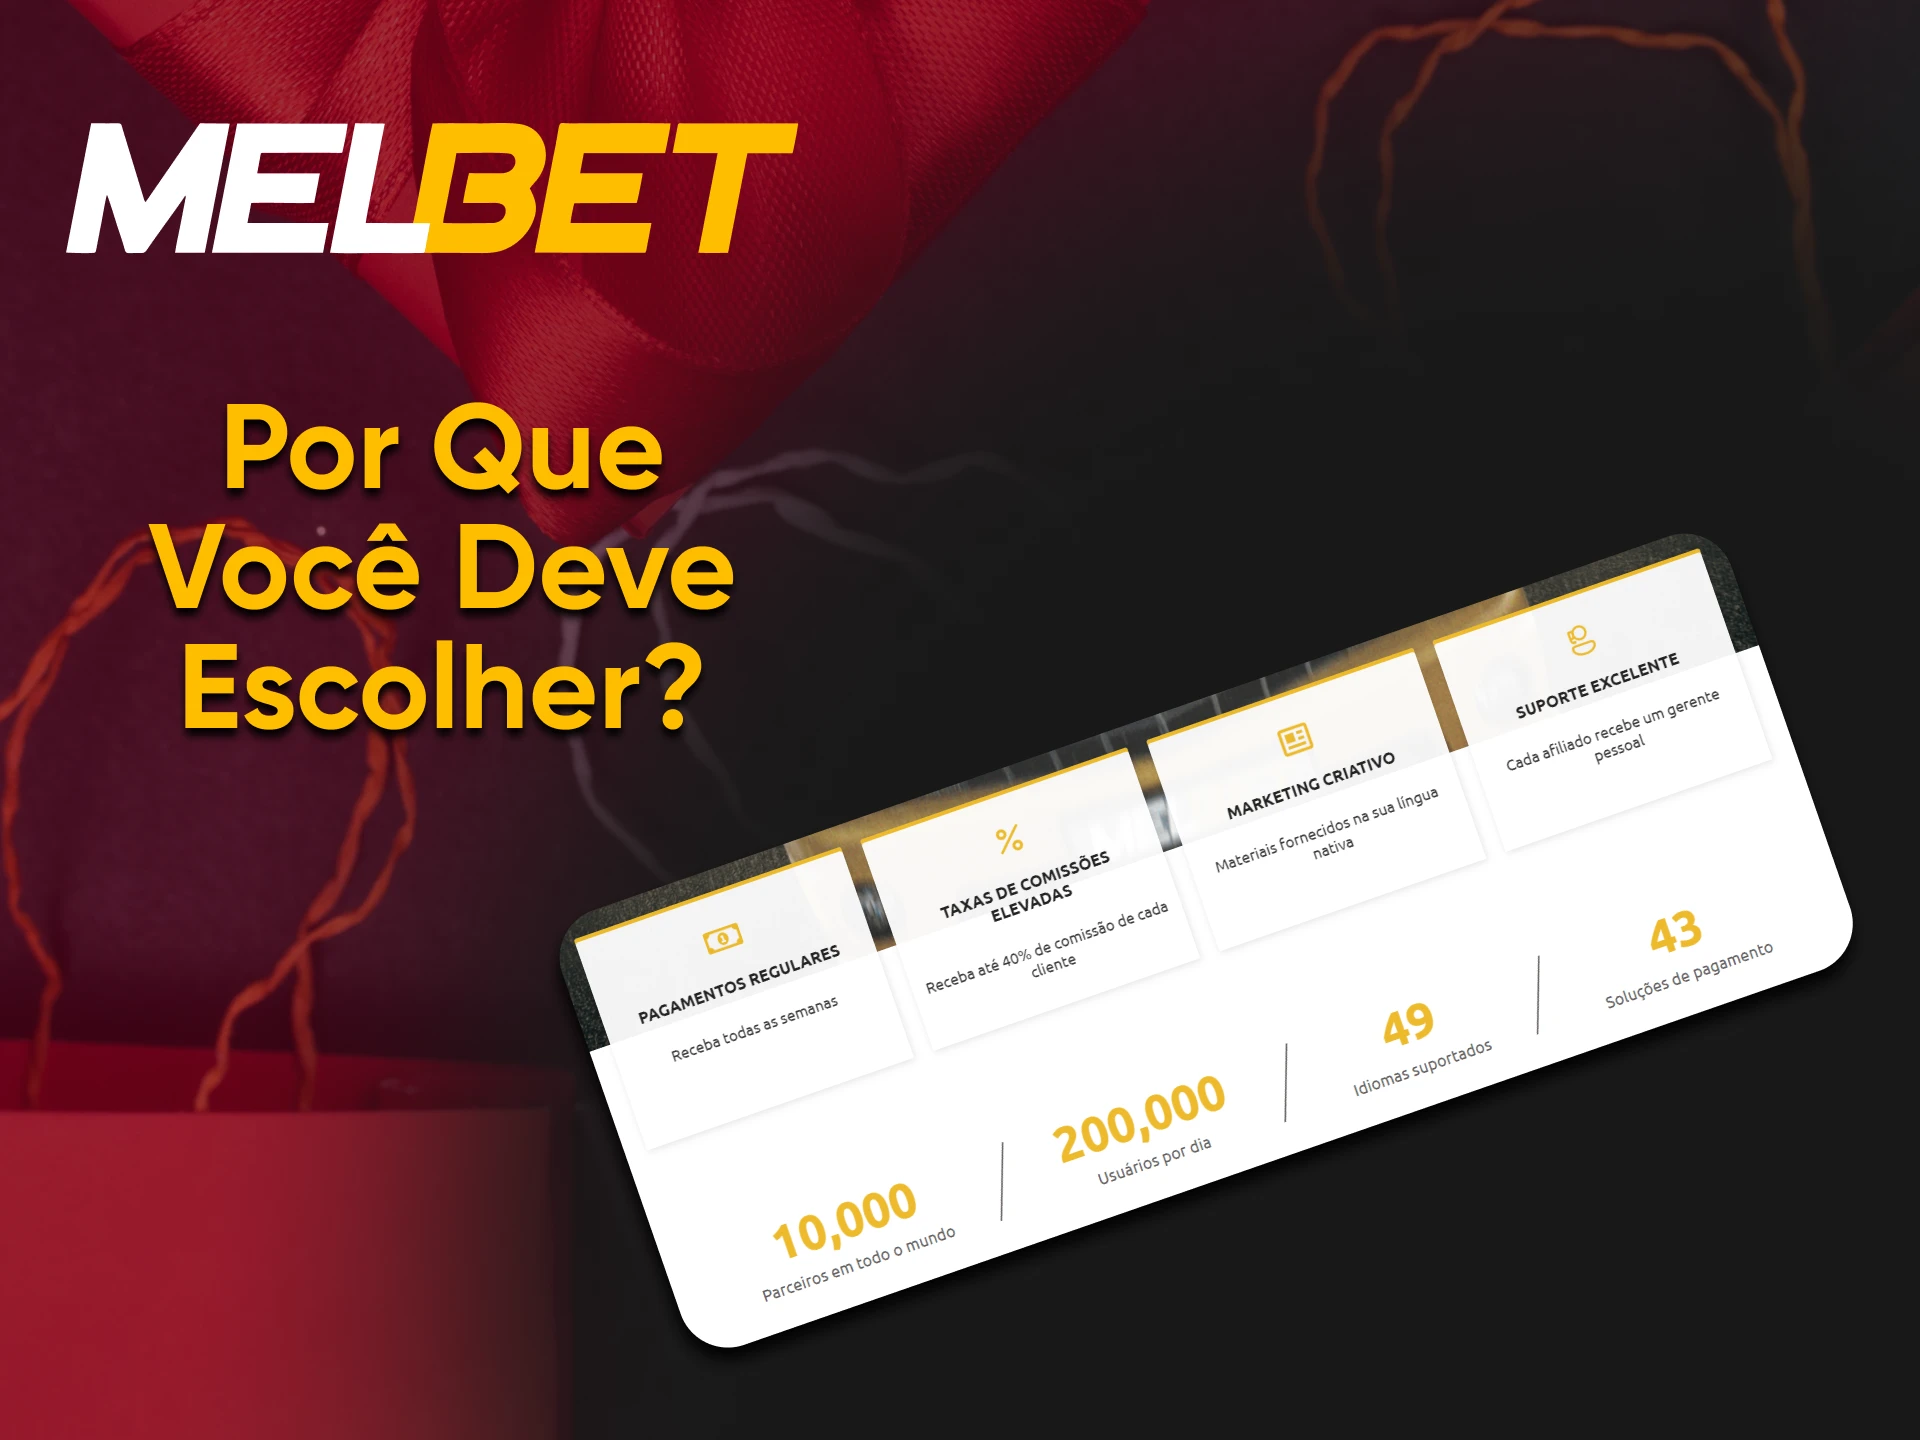 Why should you choose Melbet?